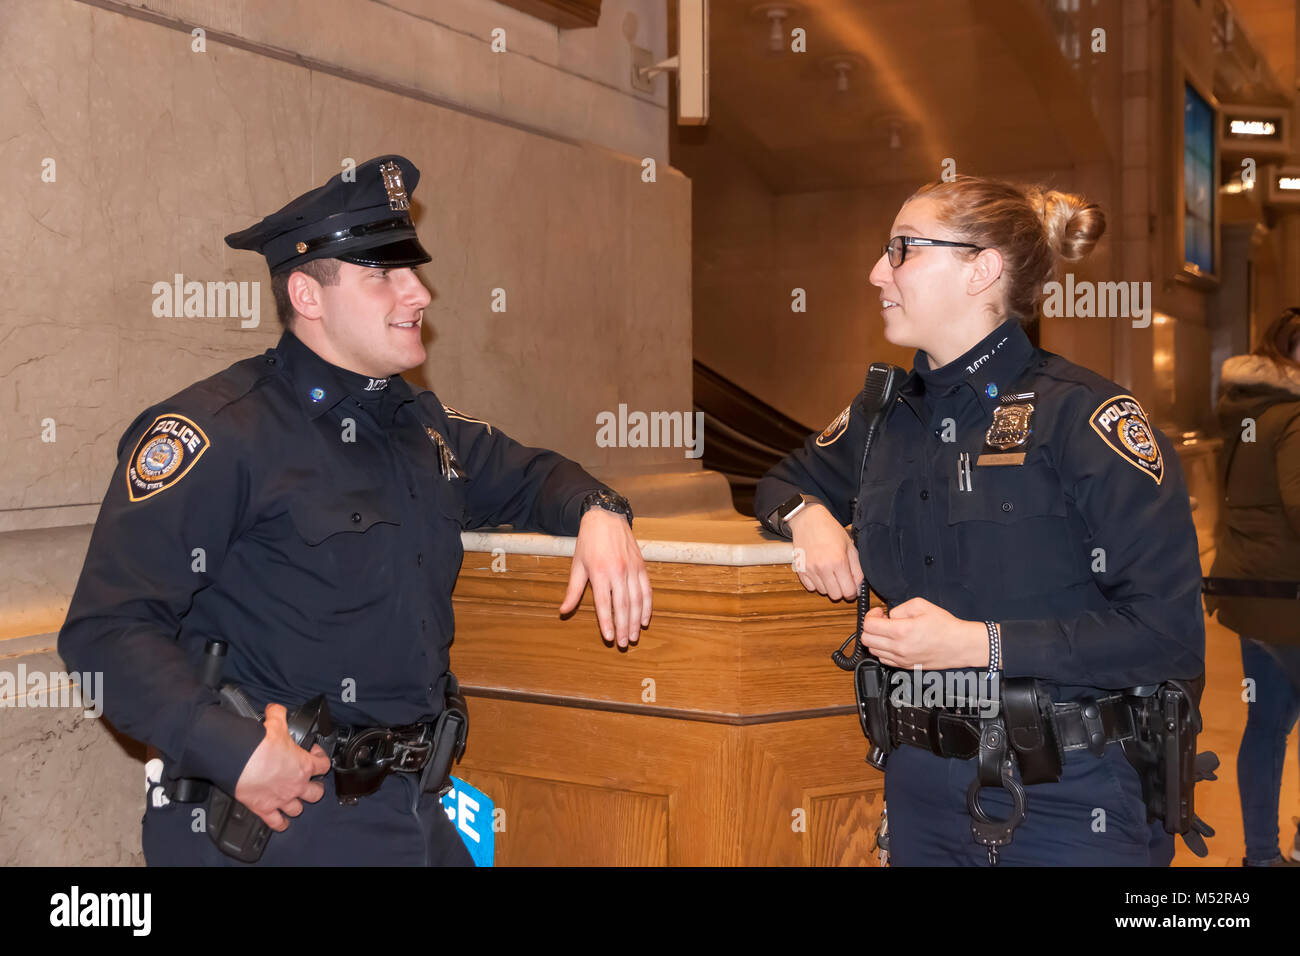 Male and female police officer having a conversation. Stock Photo